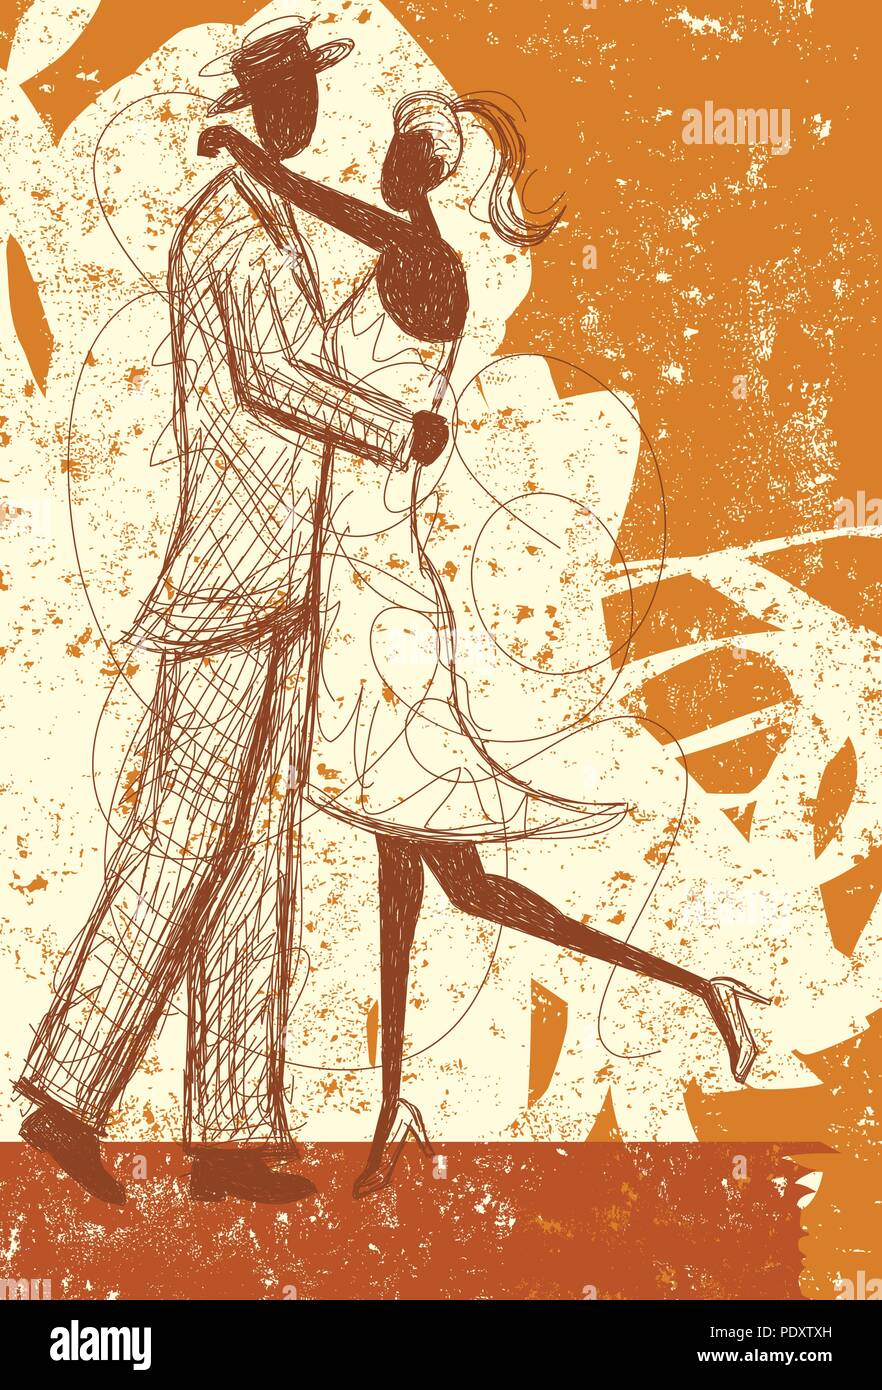 40 Romantic Couple Hugging Drawings and Sketches – Buzz16 | Sketches,  Percabeth fan art, Drawings